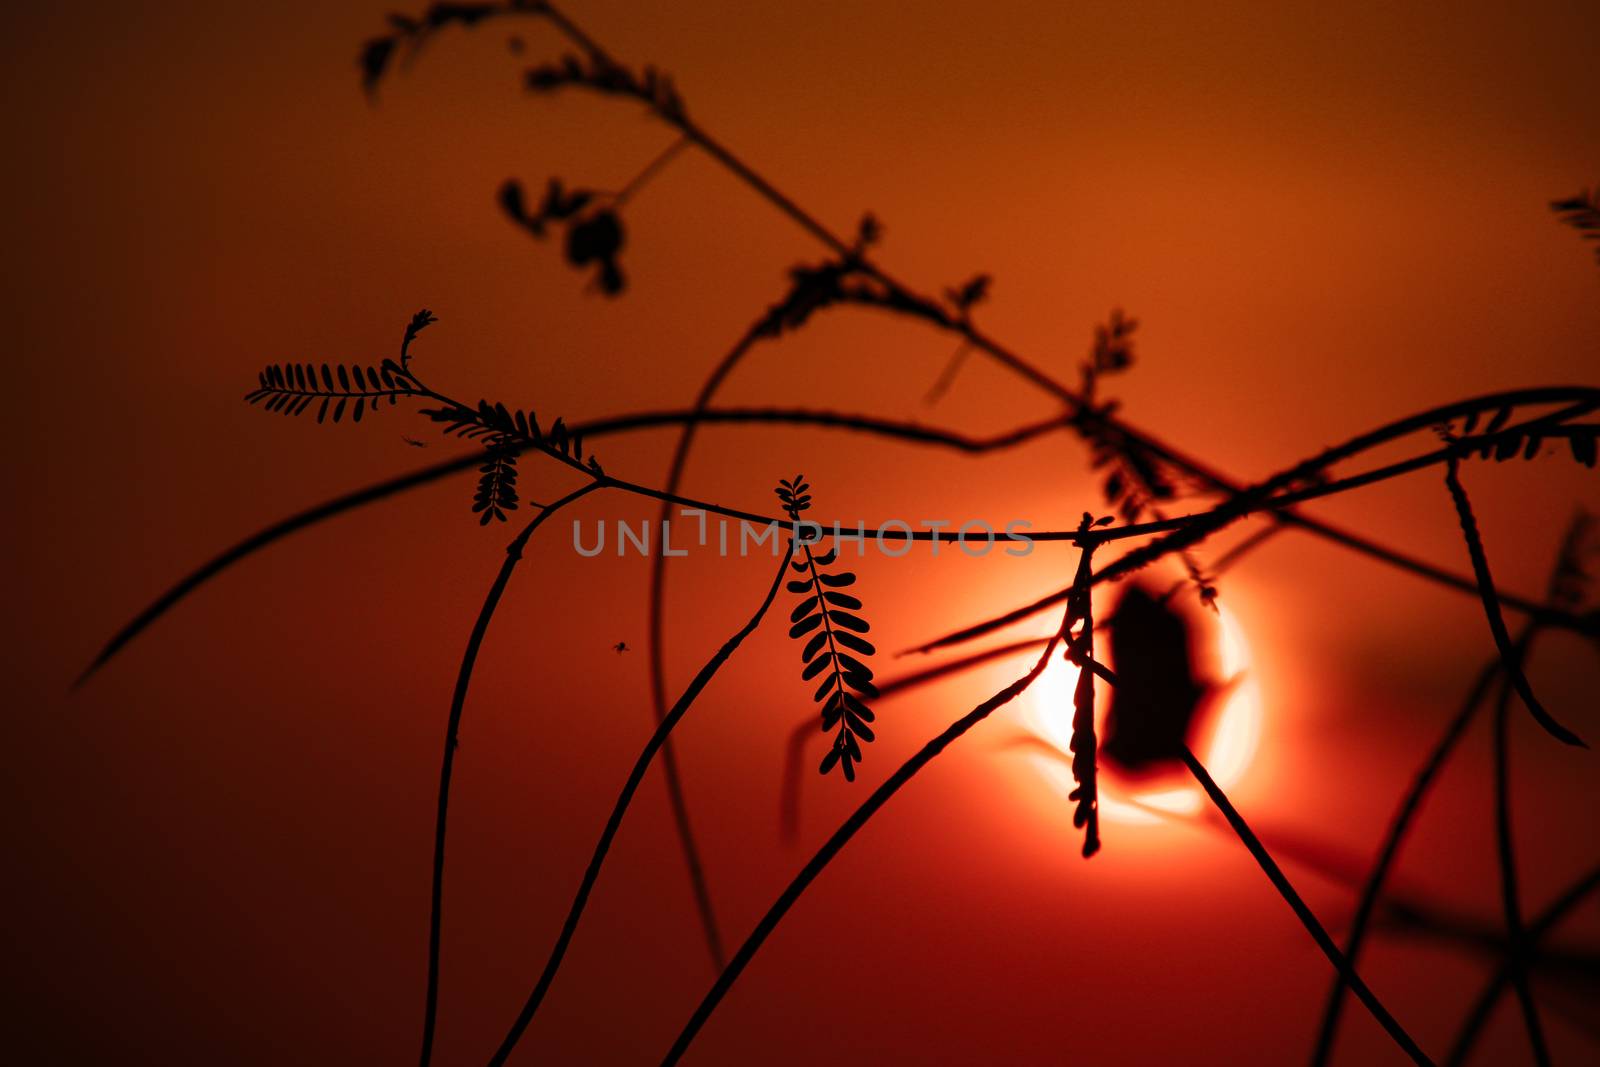 Cinematic photo of leaves silhouettes against a blood red sunset sky during the hot and humid summer season in Cambodia